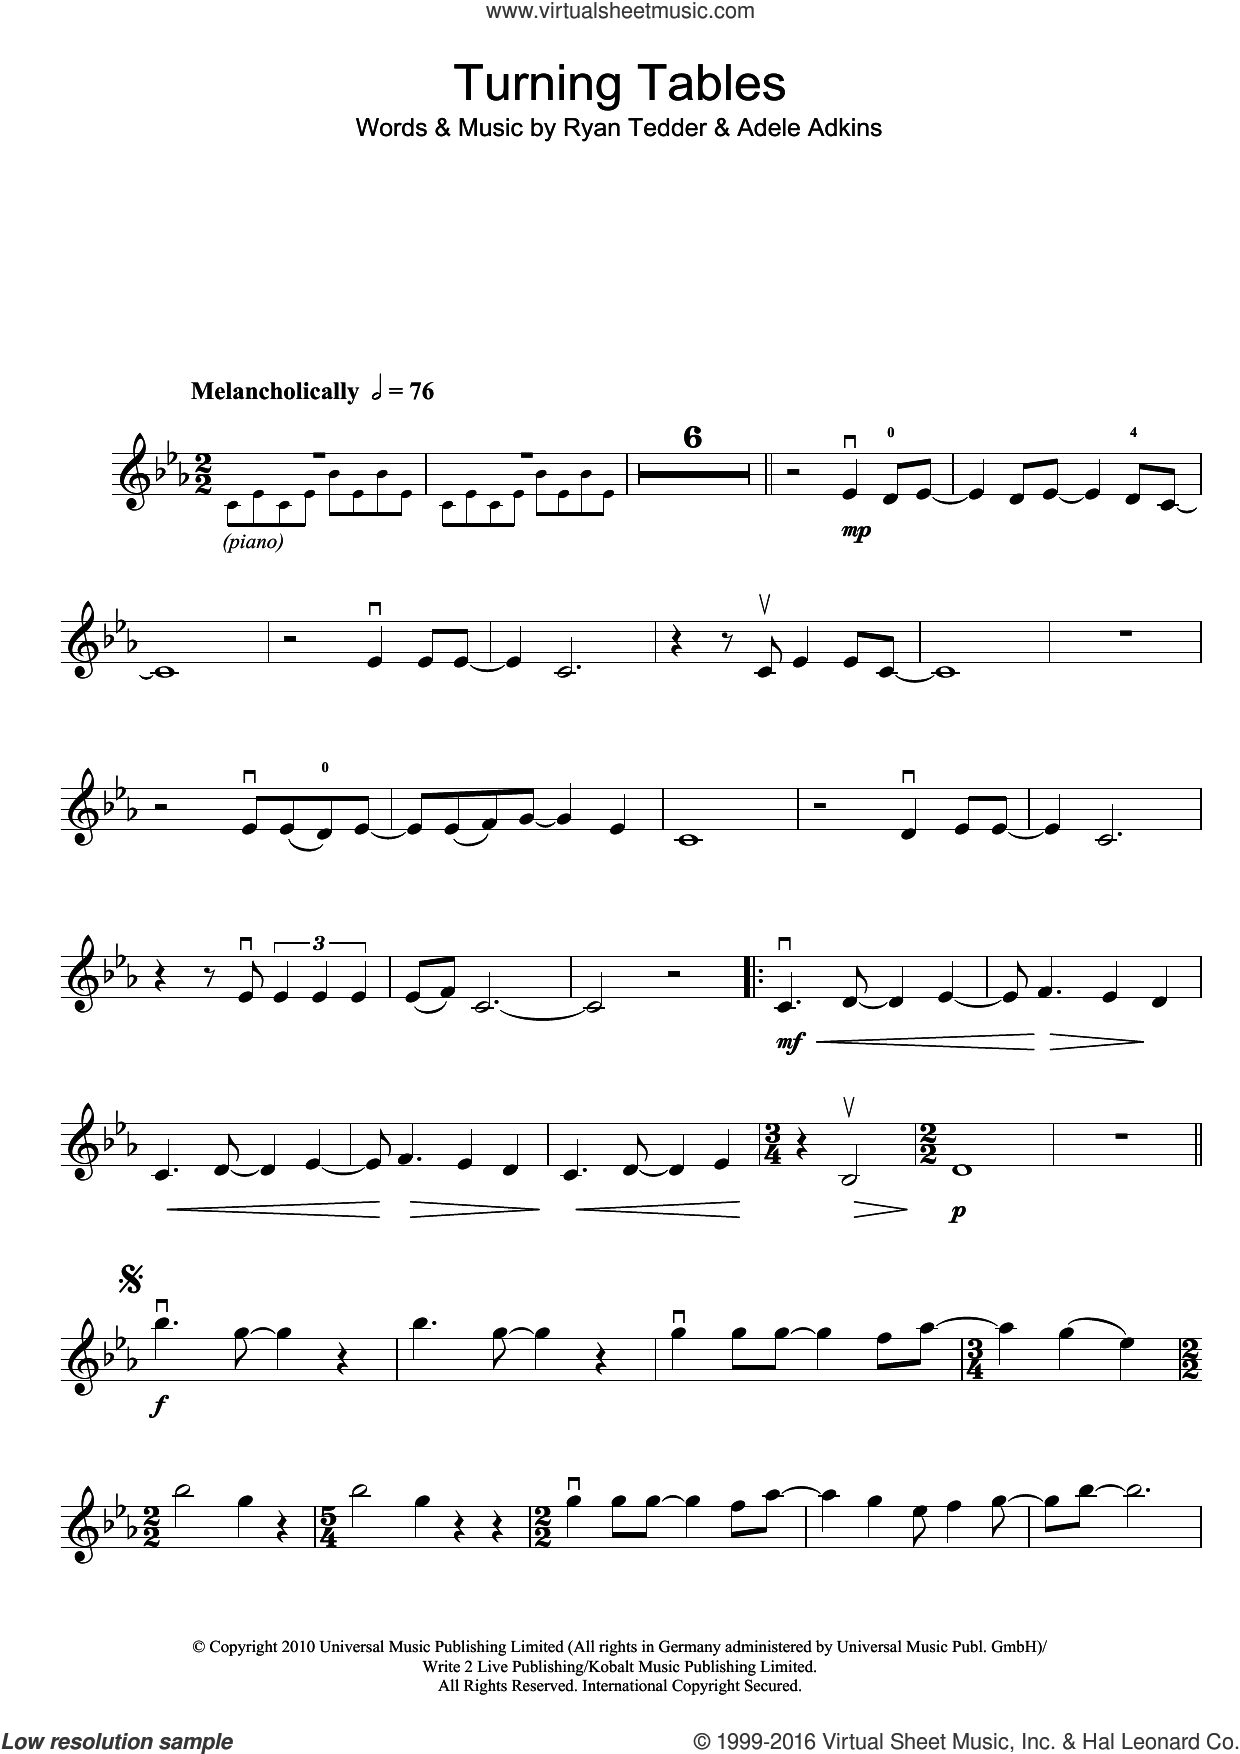 Adele - Turning Tables sheet music for violin solo [PDF]1240 x 1754